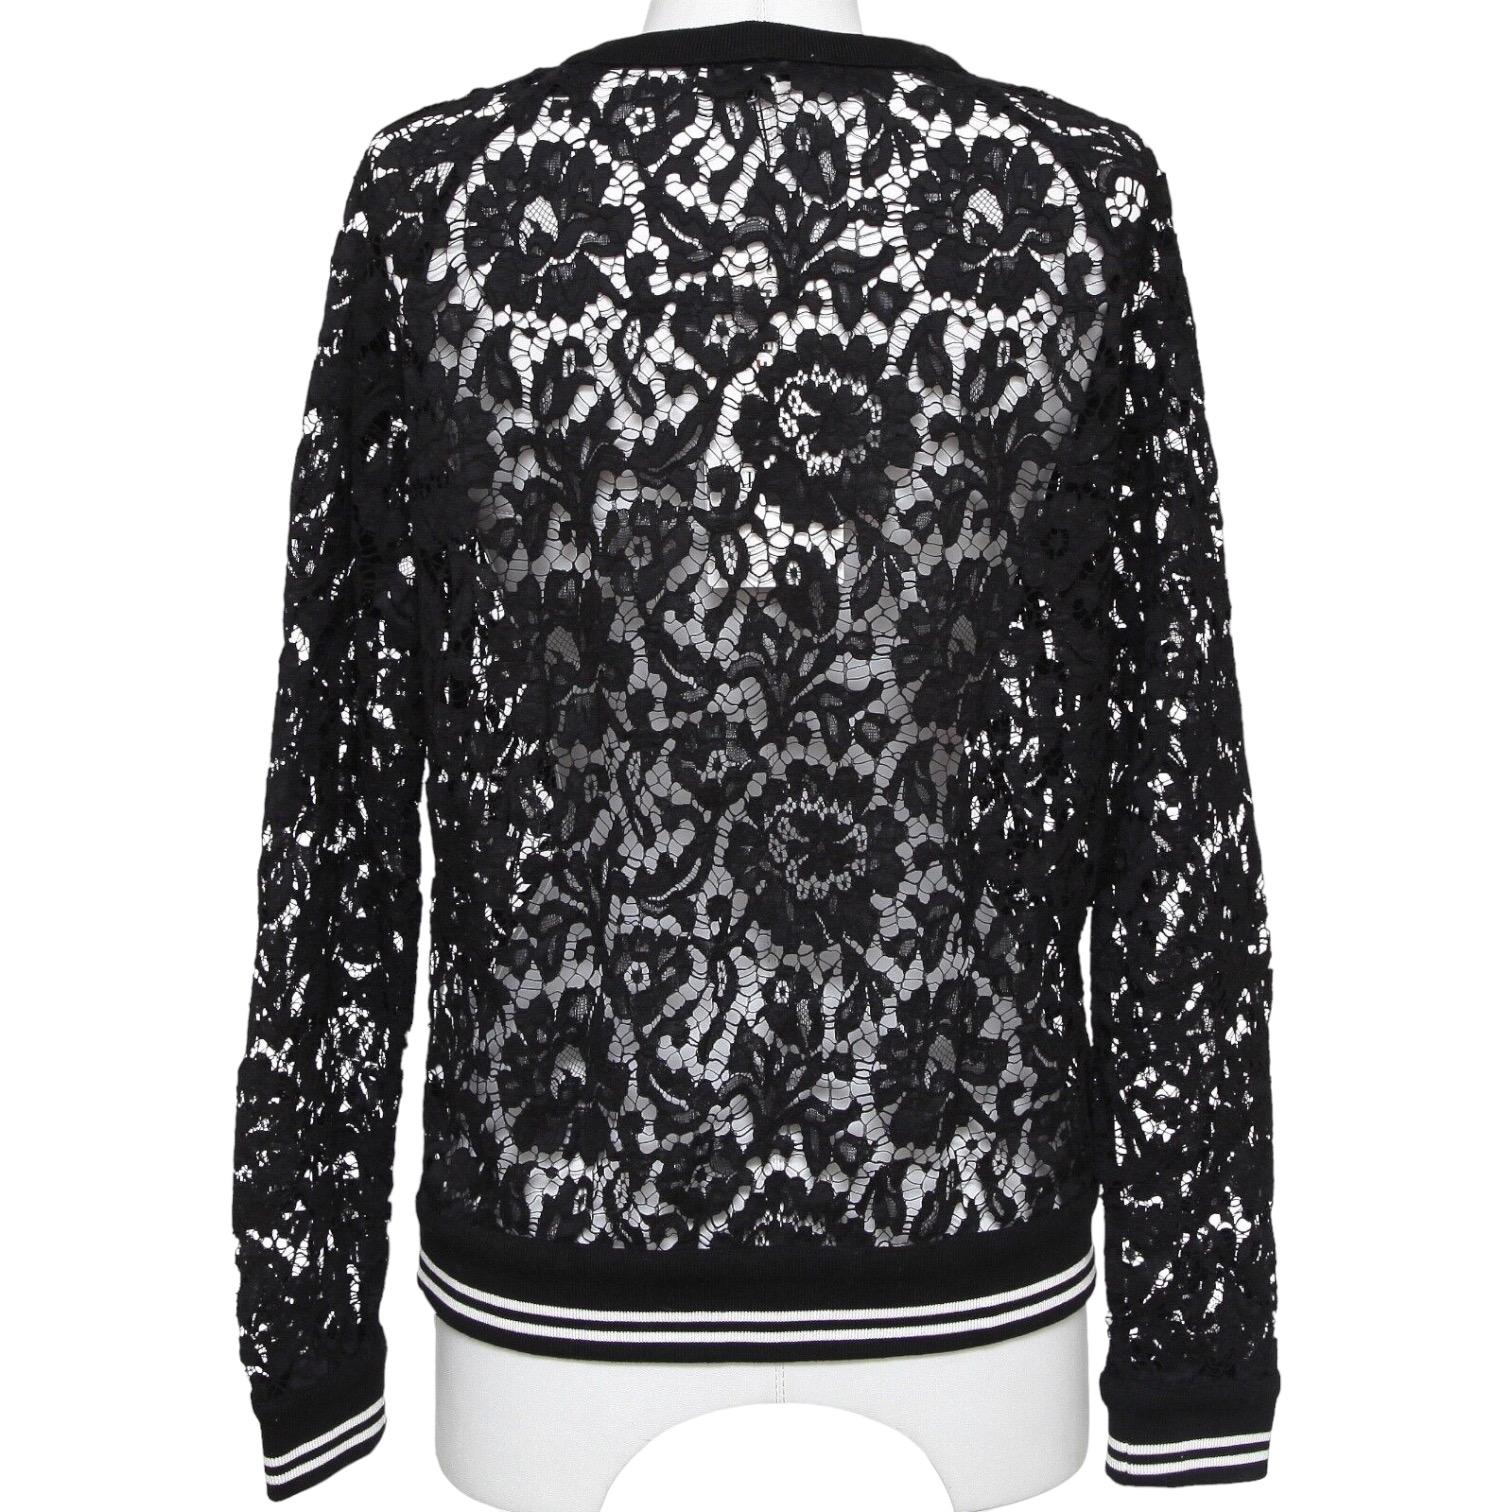 VALENTINO Floral Lace Blouse Top Shirt Long Sleeve Black White Sz S BNWT For Sale 1